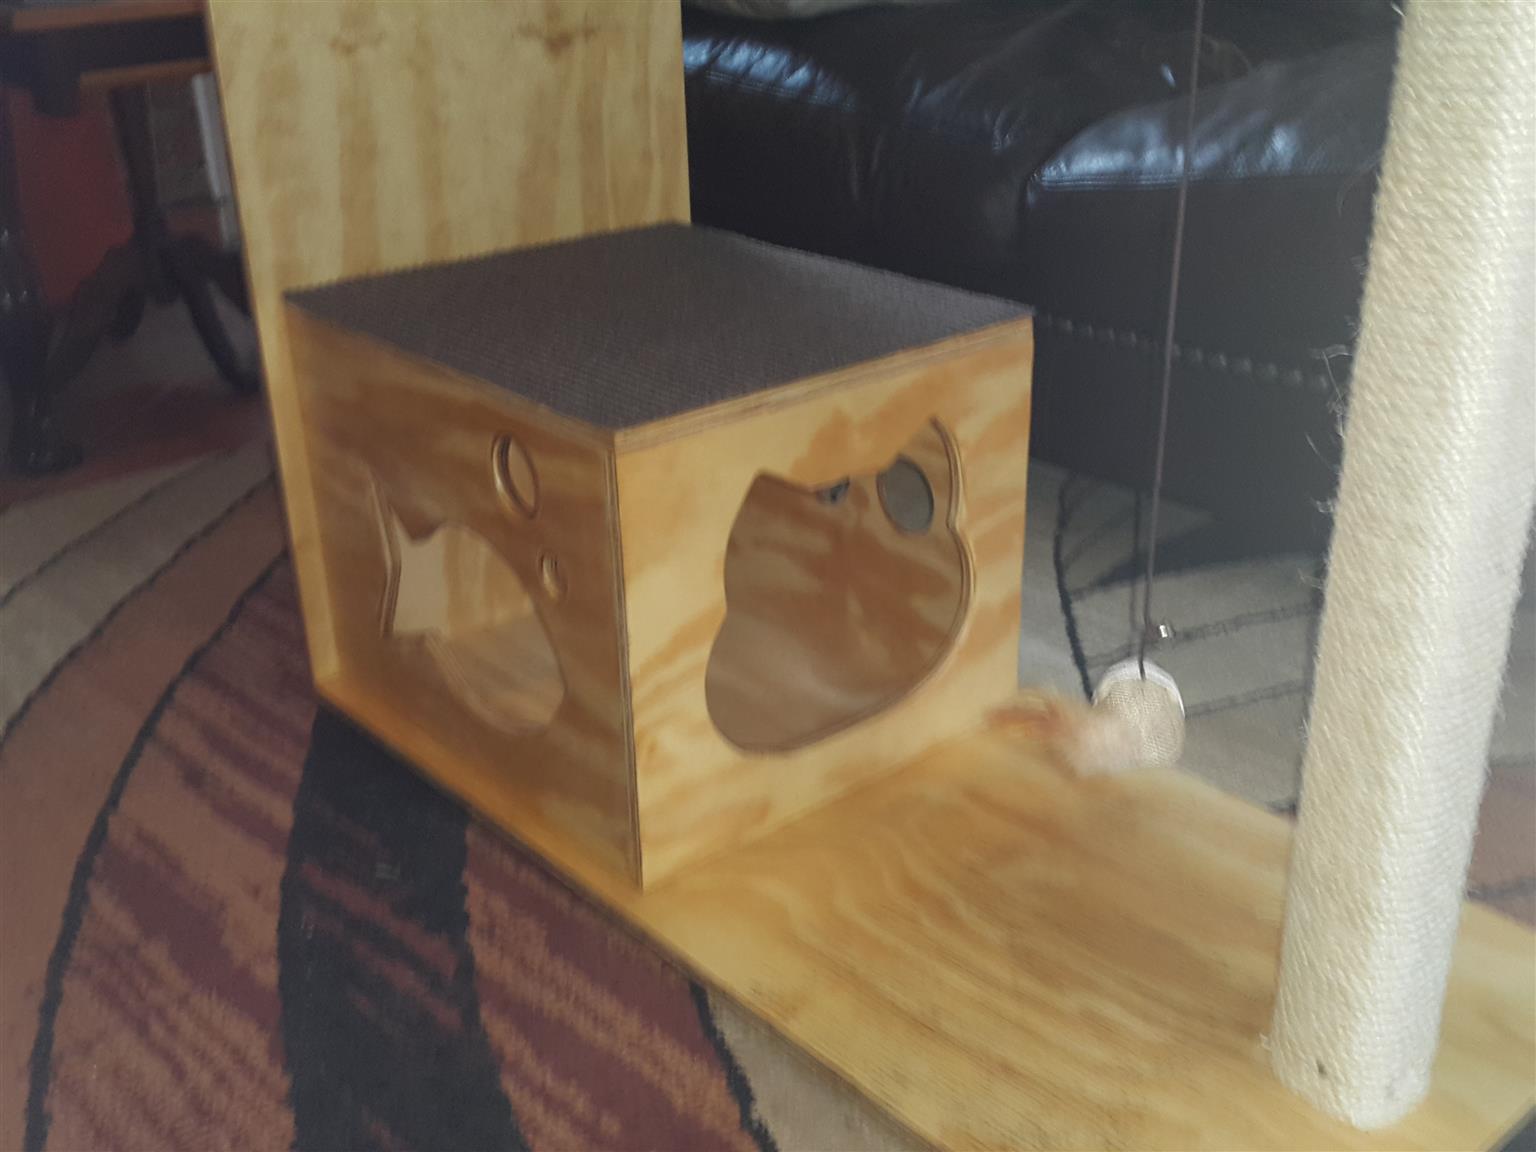 Wooden cat stand with scratching post